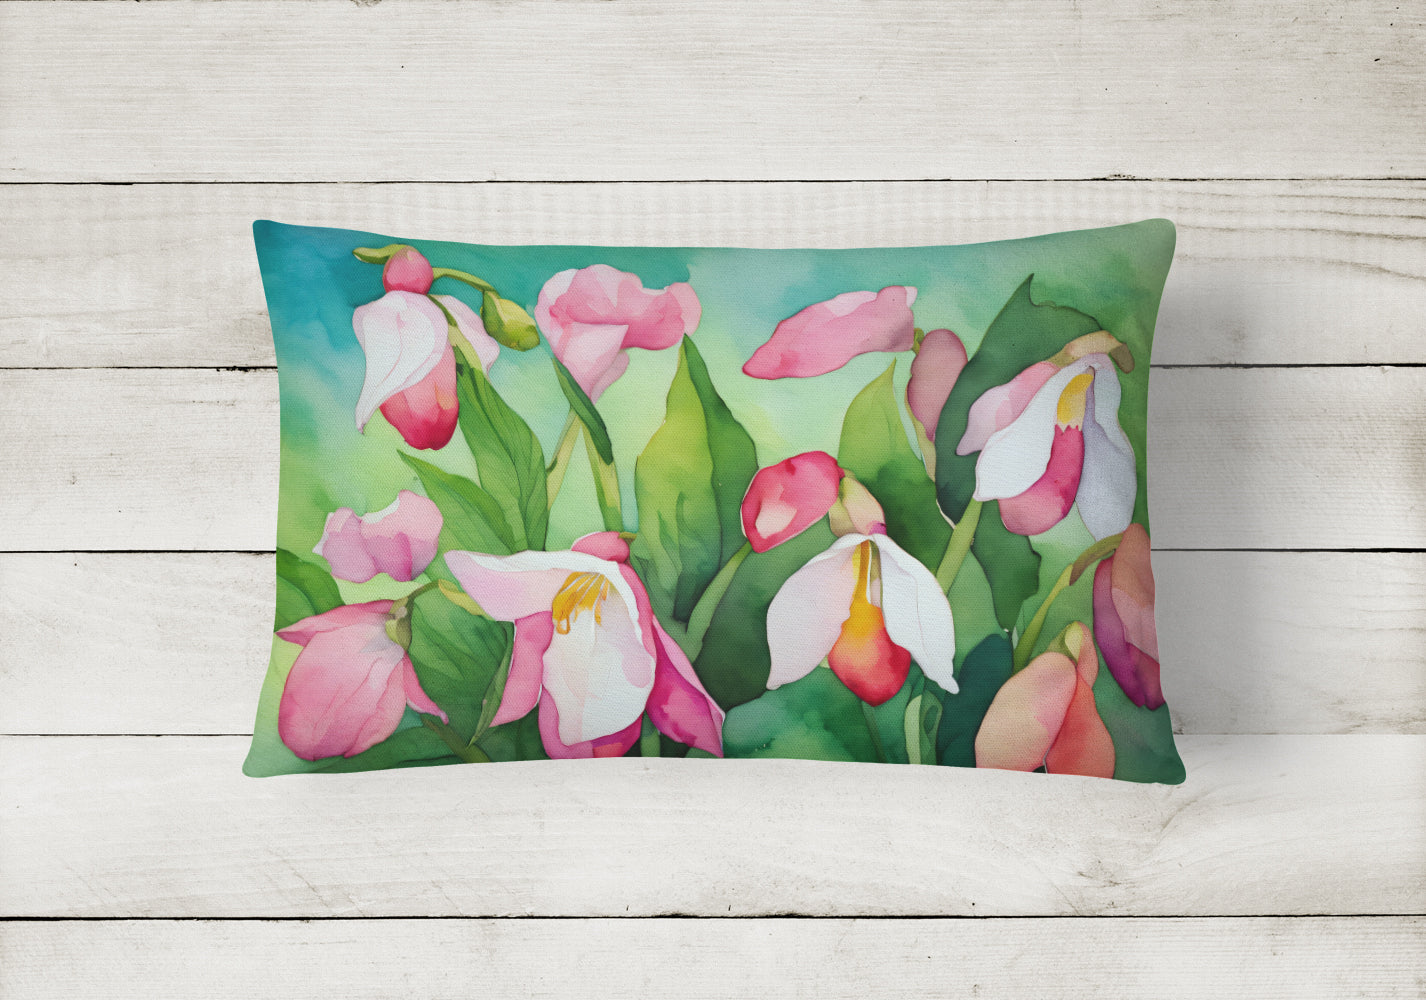 Minnesota Pink and White Lady’s Slippers in Watercolor Fabric Decorative Pillow